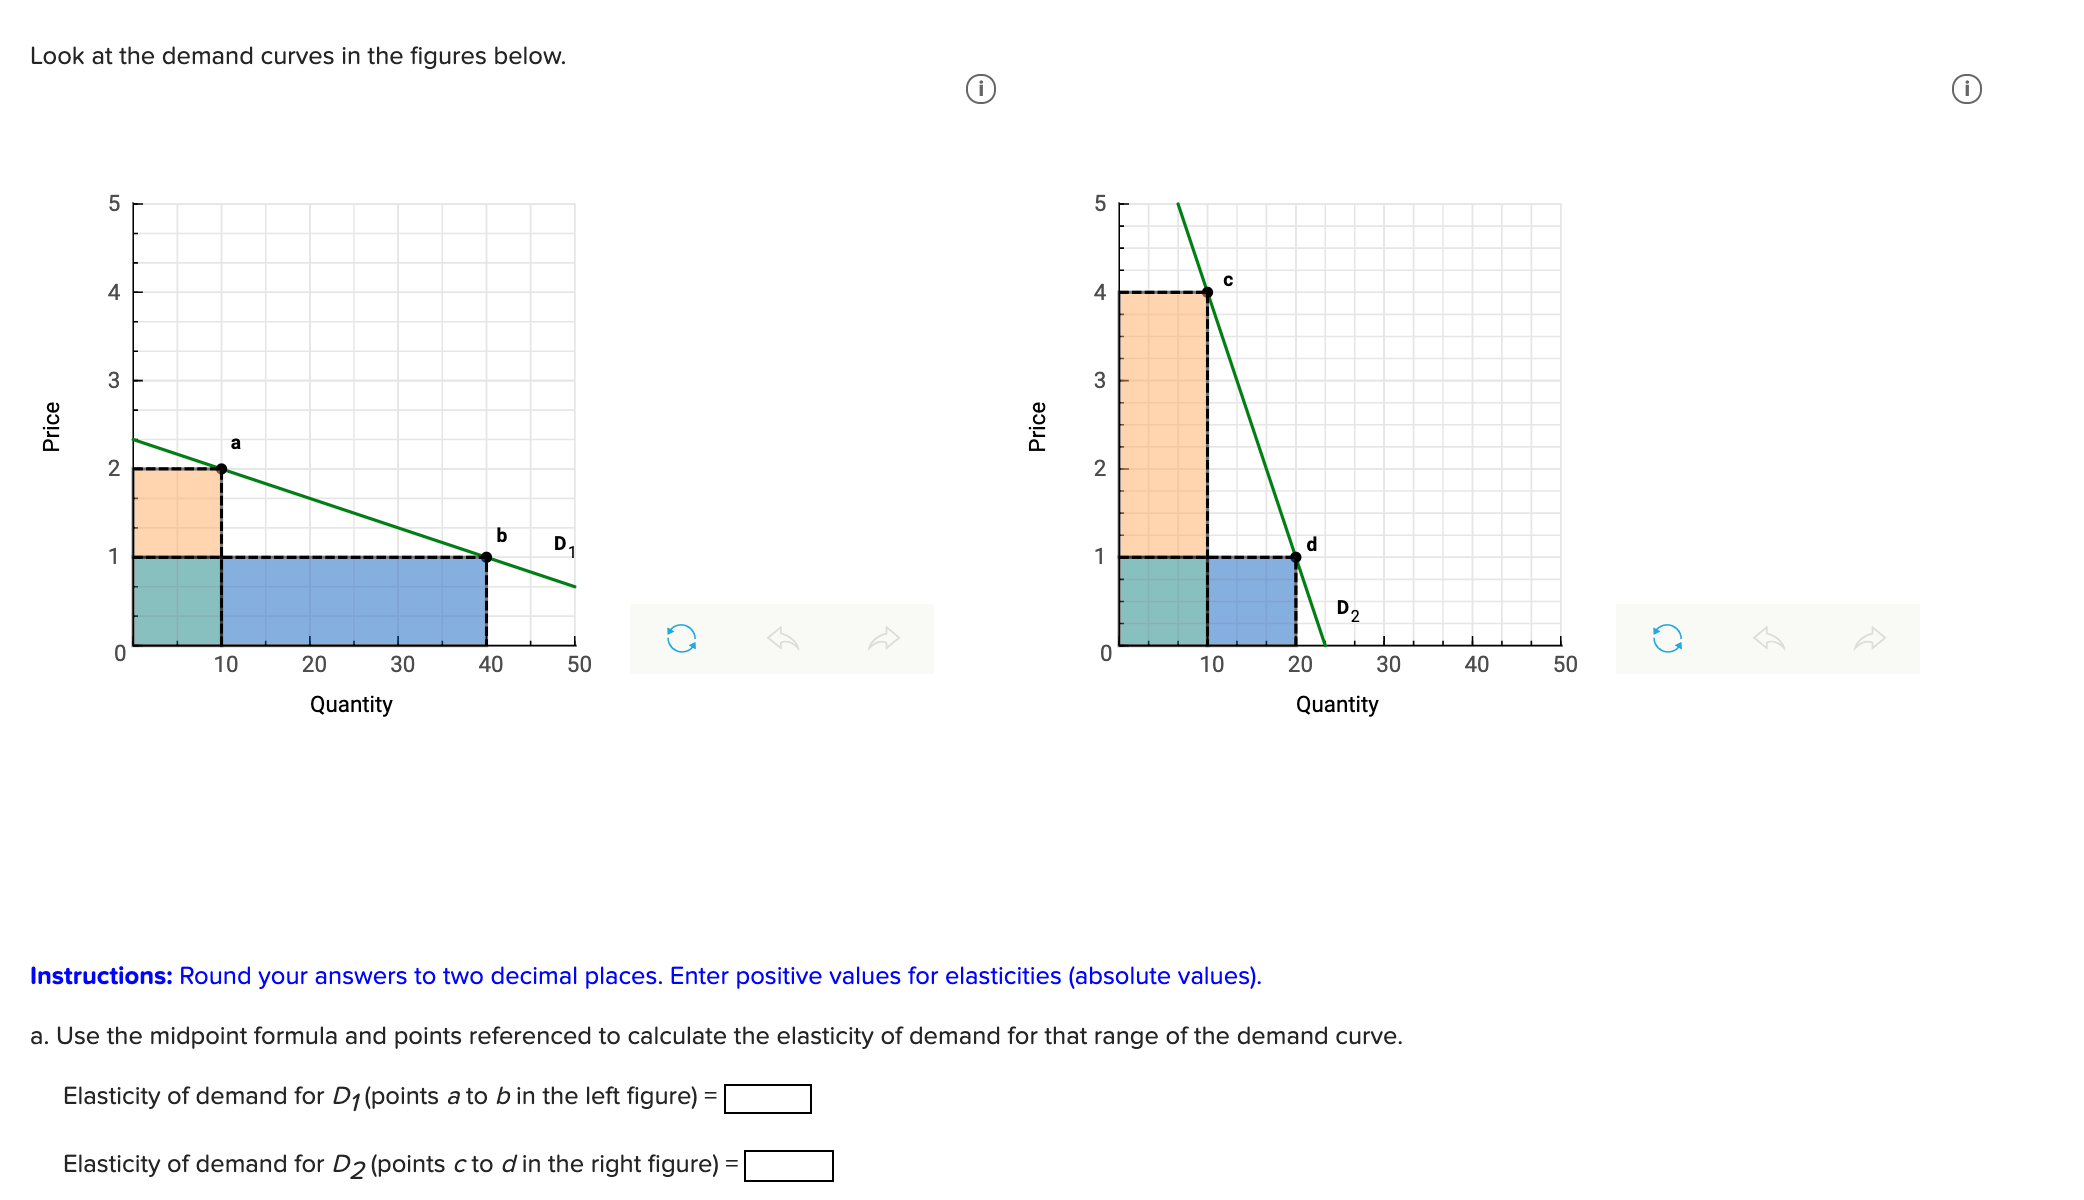 Look at the demand curves in the figures below.
4
4
3
a
2
2
D1
d
1
1
D2
10
20
30
40
10
20
30
40
50
Quantity
Quantity
Instructions: Round your answers to two decimal places. Enter positive values for elasticities (absolute values).
a. Use the midpoint formula and points referenced to calculate the elasticity of demand for that range of the demand curve.
Elasticity of demand for D1 (points a to bin the left figure)
Elasticity of demand for D2 (points c to din the right figure)
3.
Price
50
LO
Price
